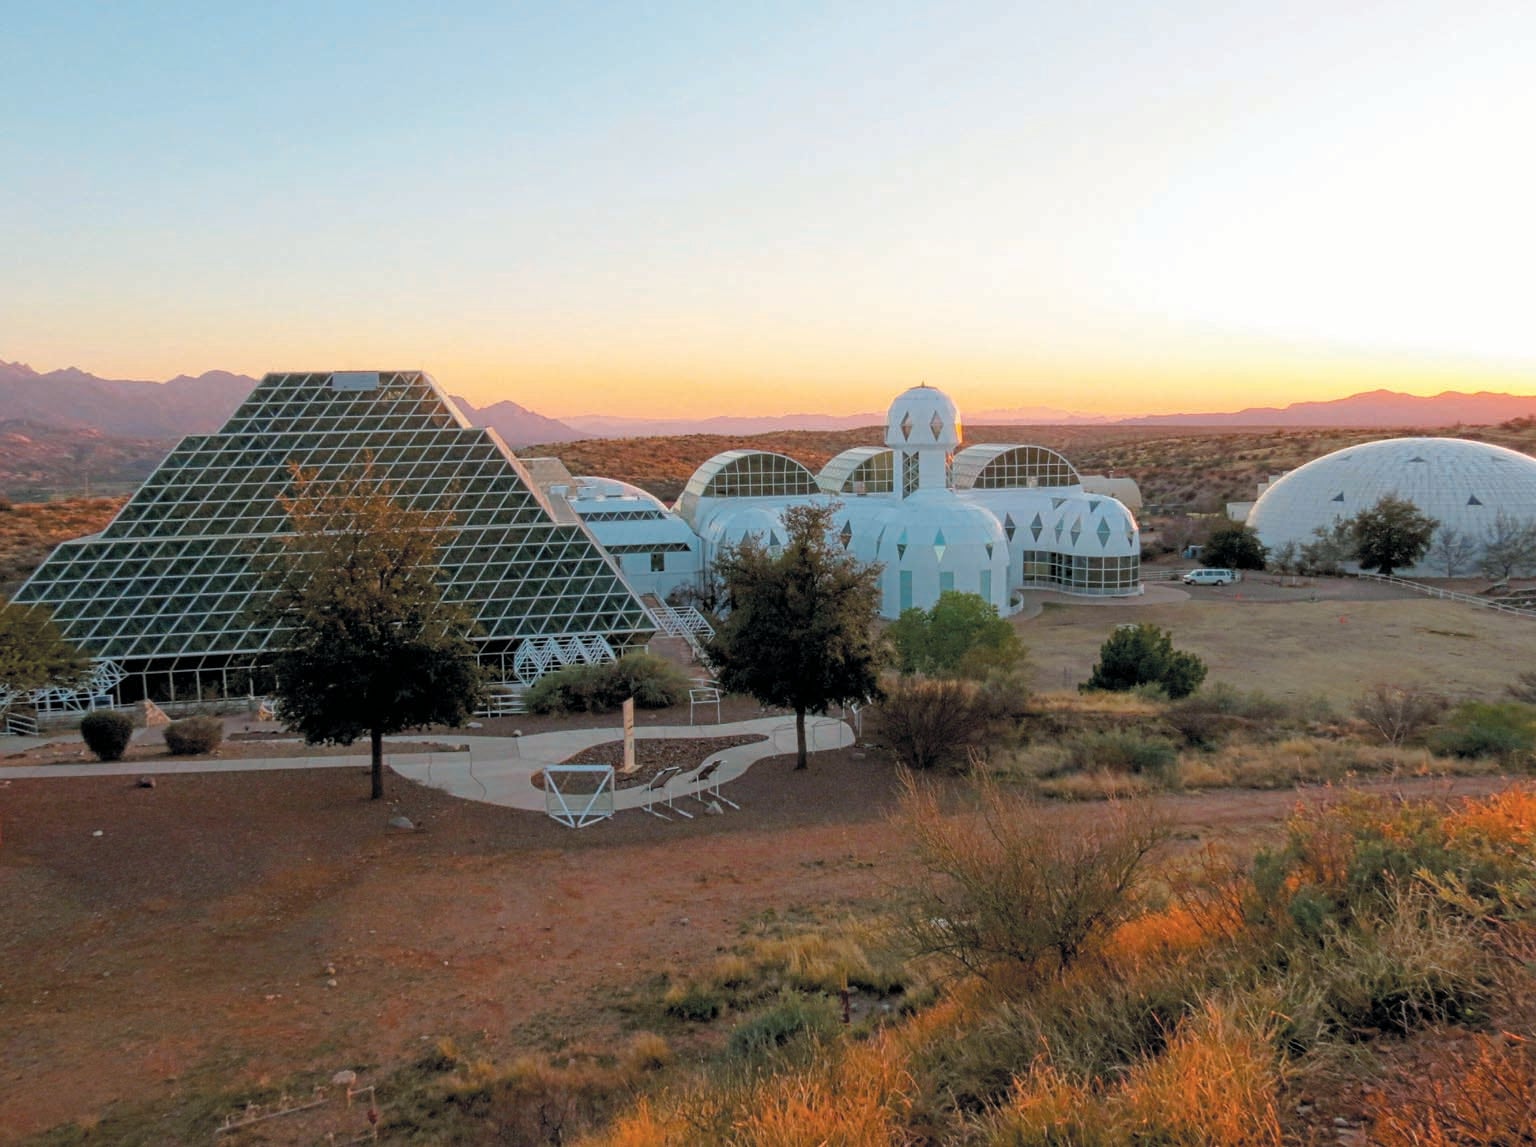 White geometric shaped buildings, identified as “The Biosphere 2 research facility” set in desert landscape.